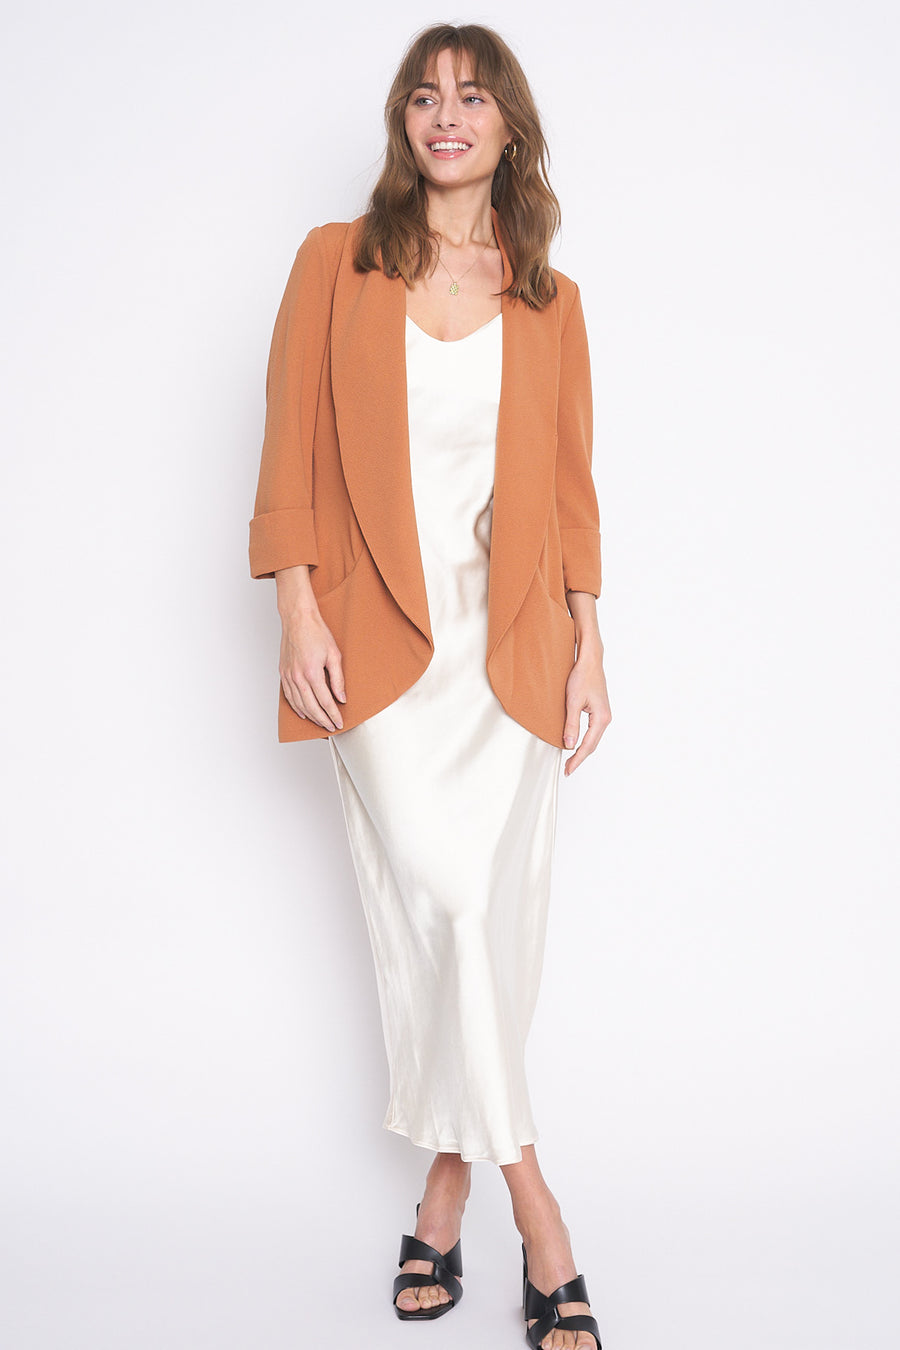 No Srcipt image - Images of 1 of 5 Classic Melanie Shawl Ash Brown Color Staple Workwear Blazer